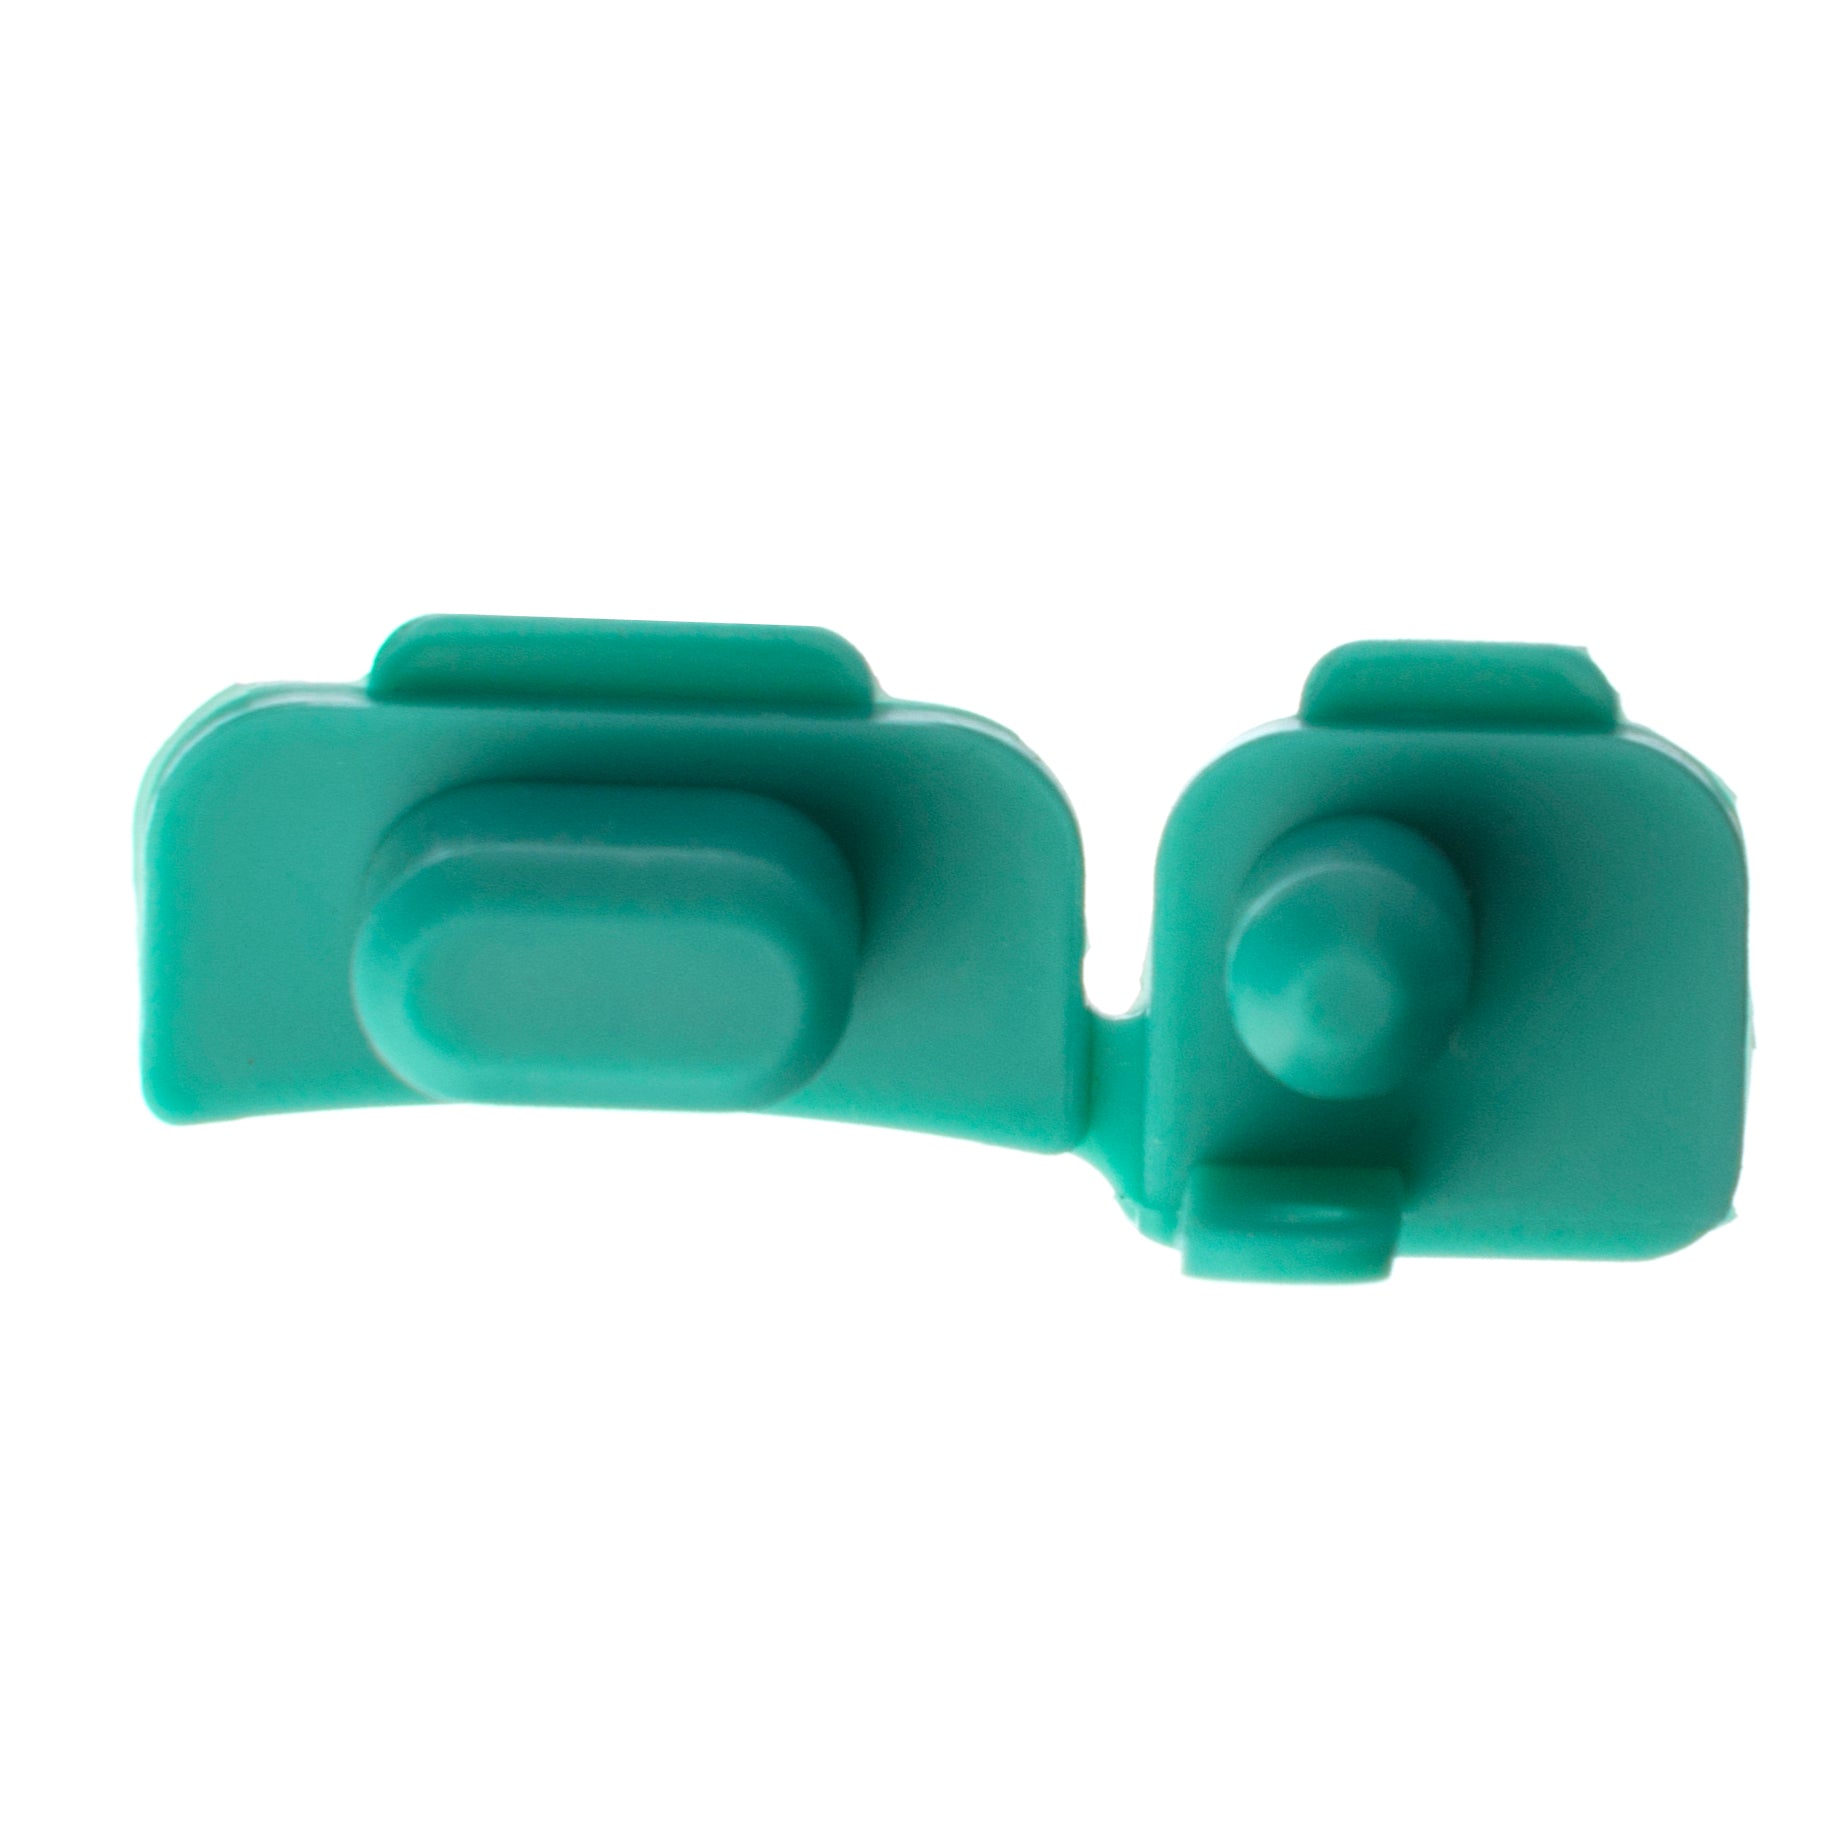 Rubber iPhone X Tough Case Replacement Plugs